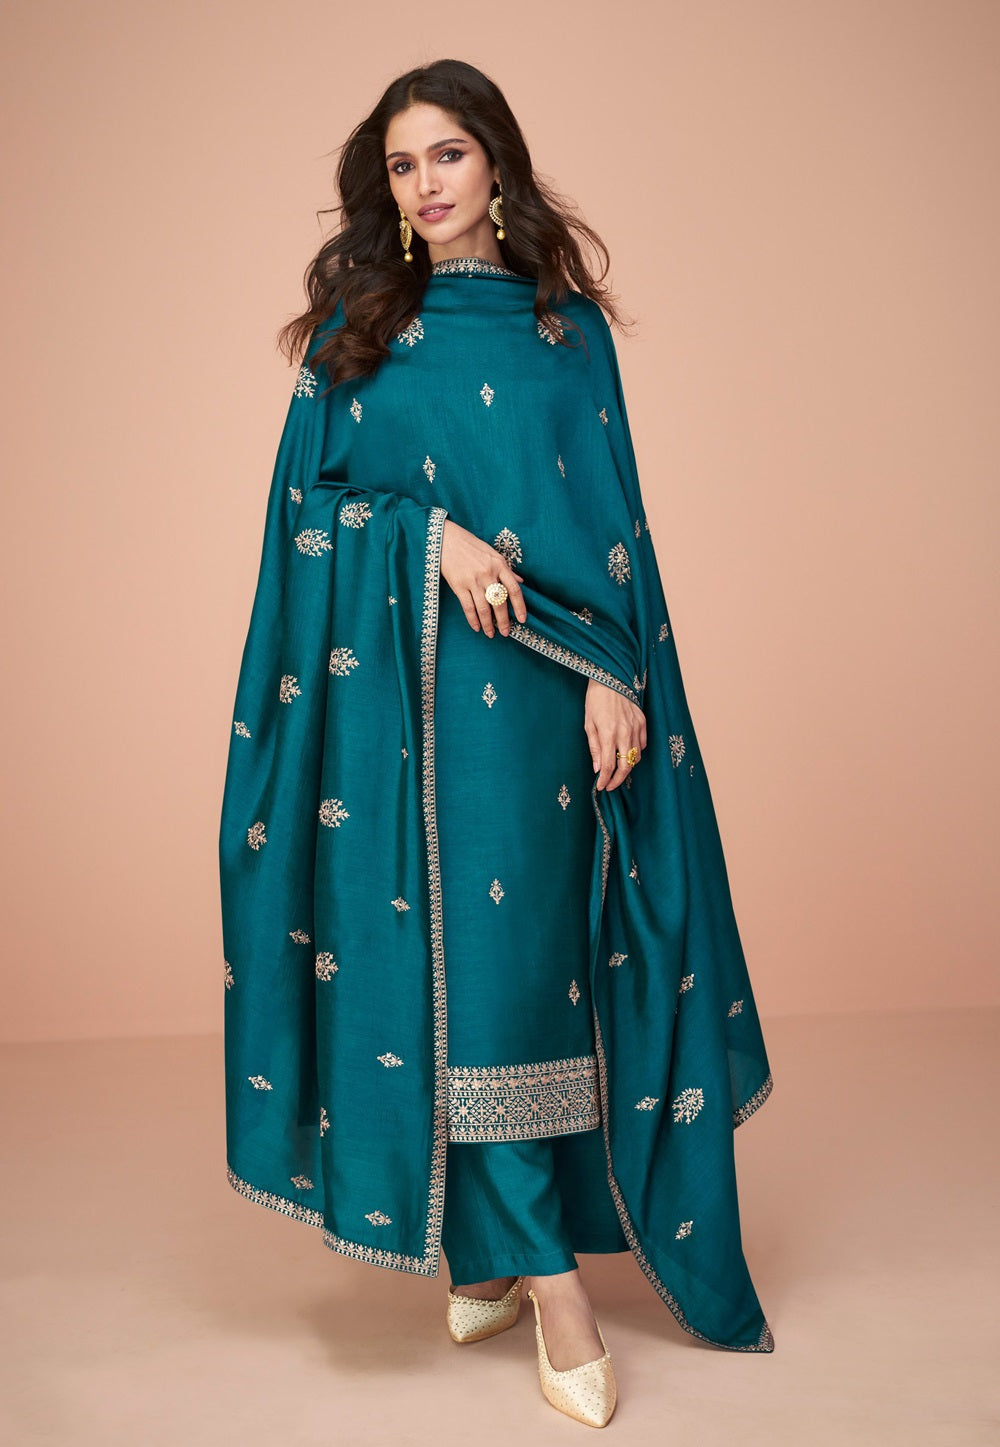 Art Silk Pakistani Embroidered Suit in Teal Blue